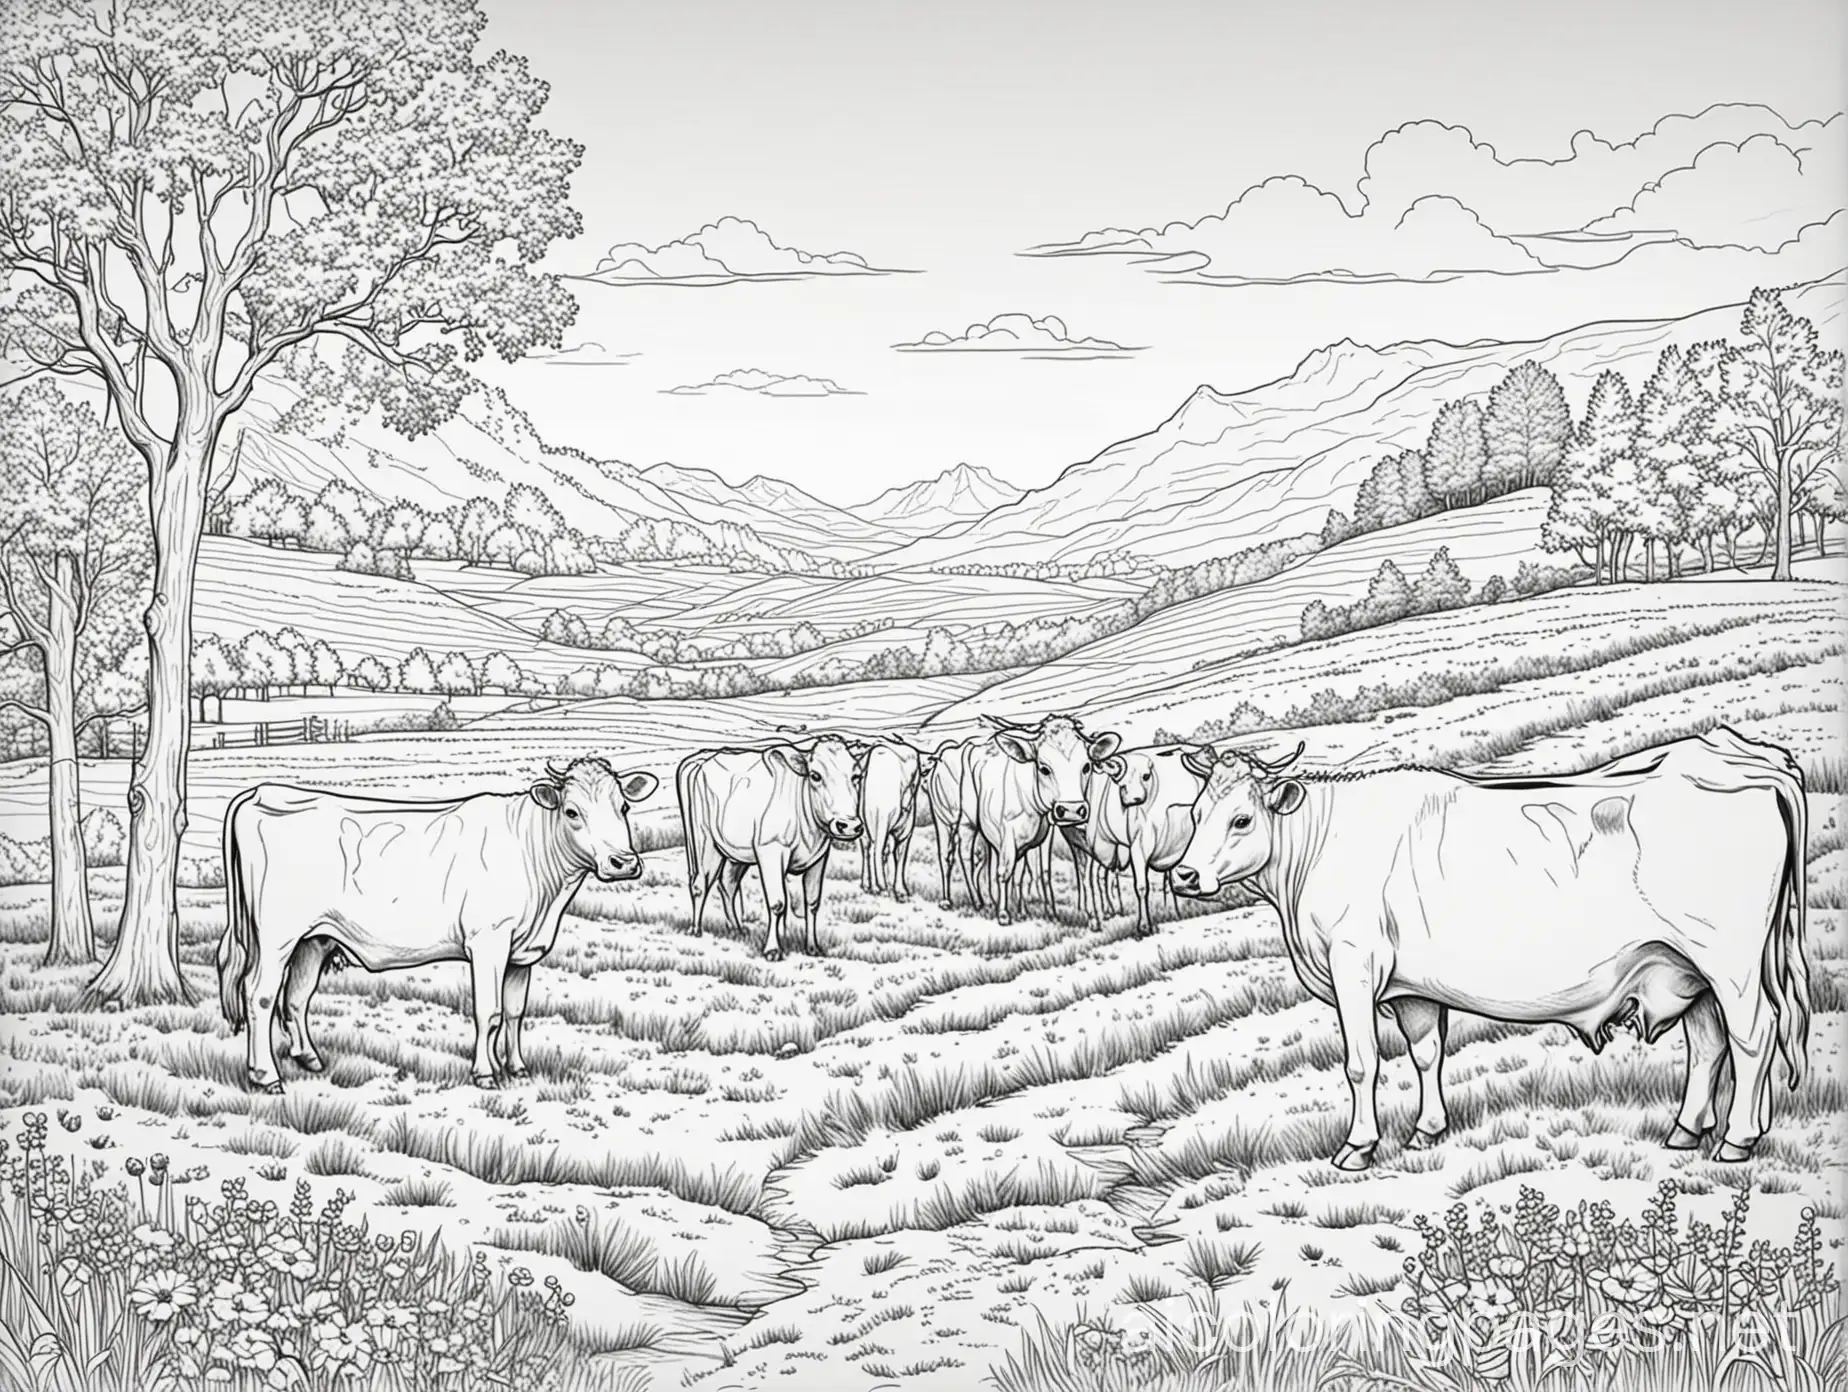 cows field landscape on one plan Coloring Page, black and white, line art, white background, Simplicity, Ample White Space. The background of the coloring page is plain white to make it easy for young children to color within the lines. The outlines of all the subjects are easy to distinguish, making it simple for kids to color without too much difficulty. The background of the coloring page is plain white to make it easy for young children to color within the lines. The outlines of all the subjects are easy to distinguish, making it simple for kids to color without too much difficulty.